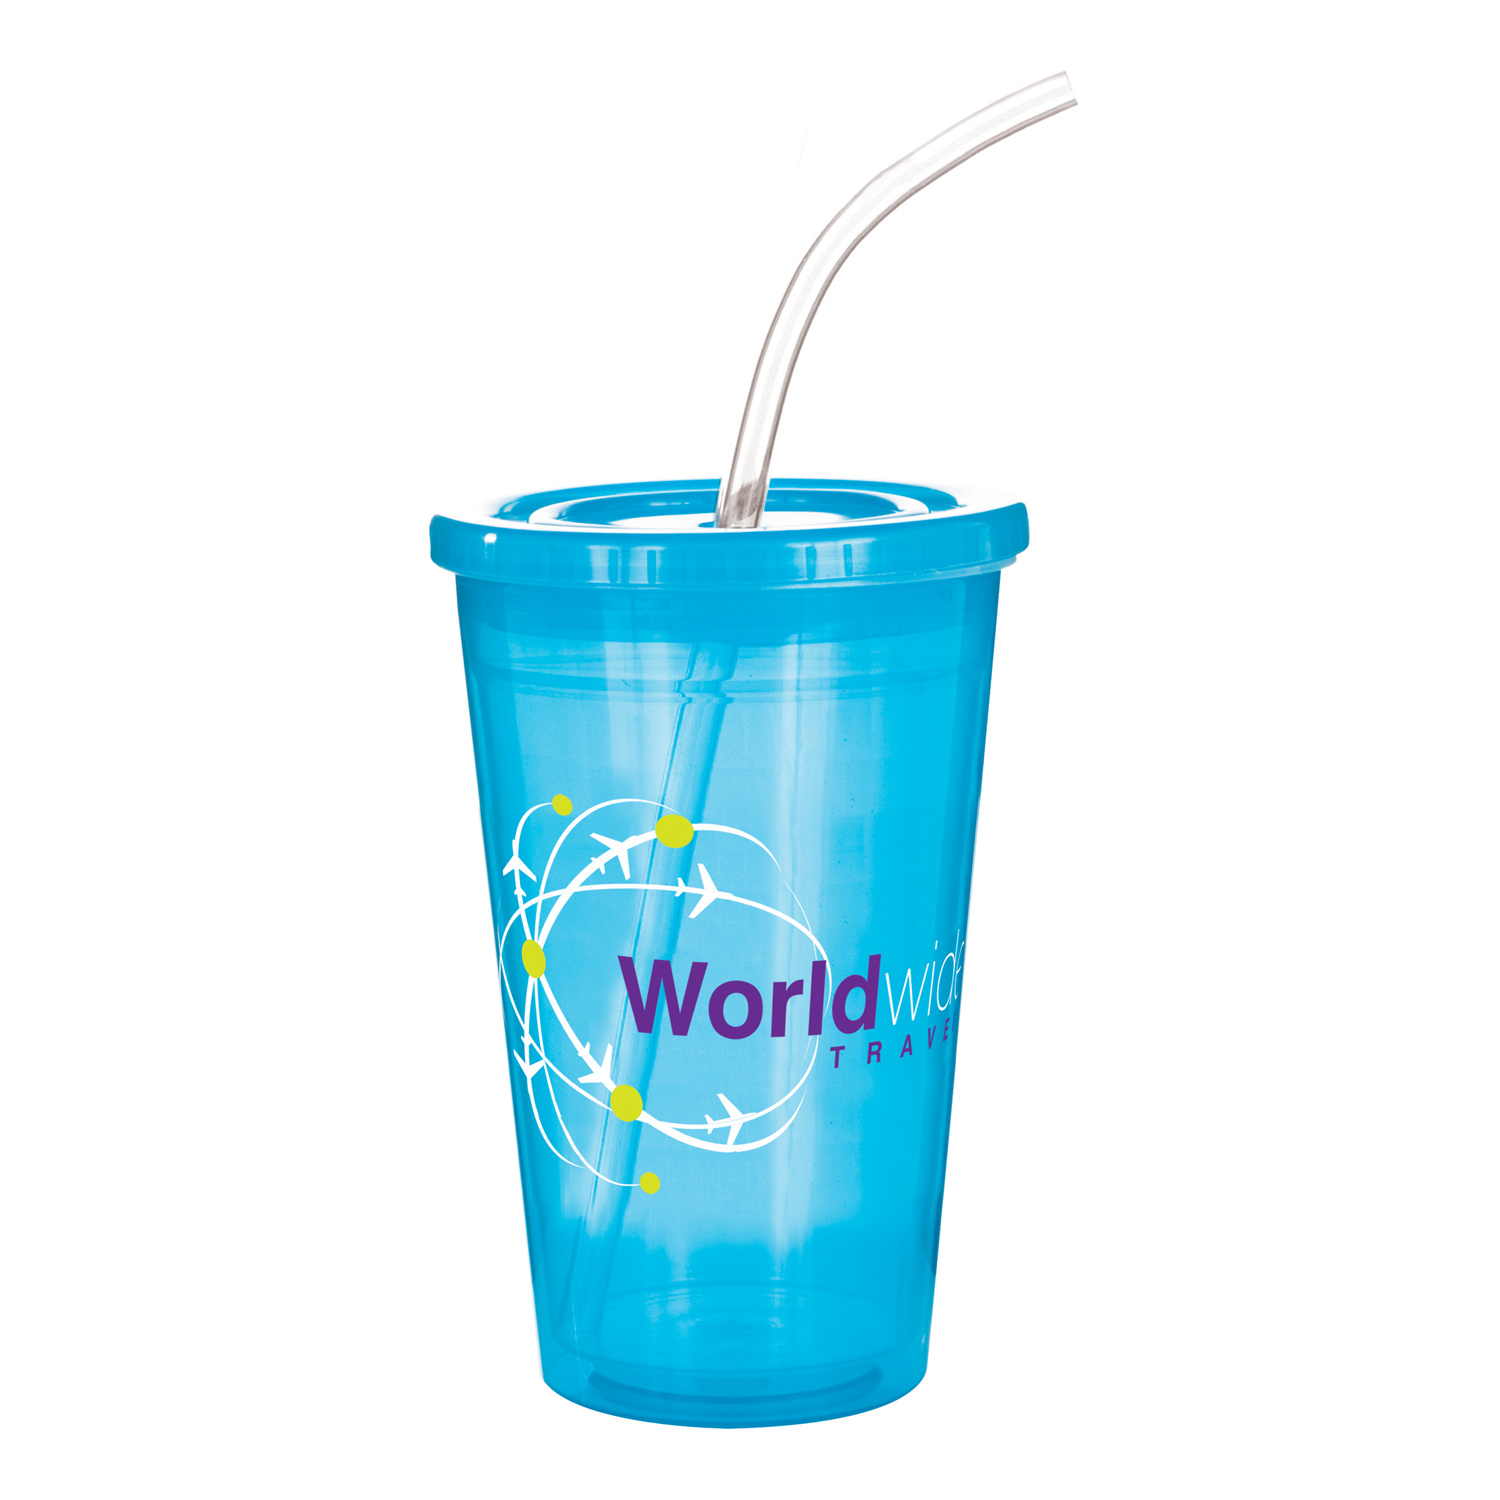 Drink cups with straw and lid in translucent blue